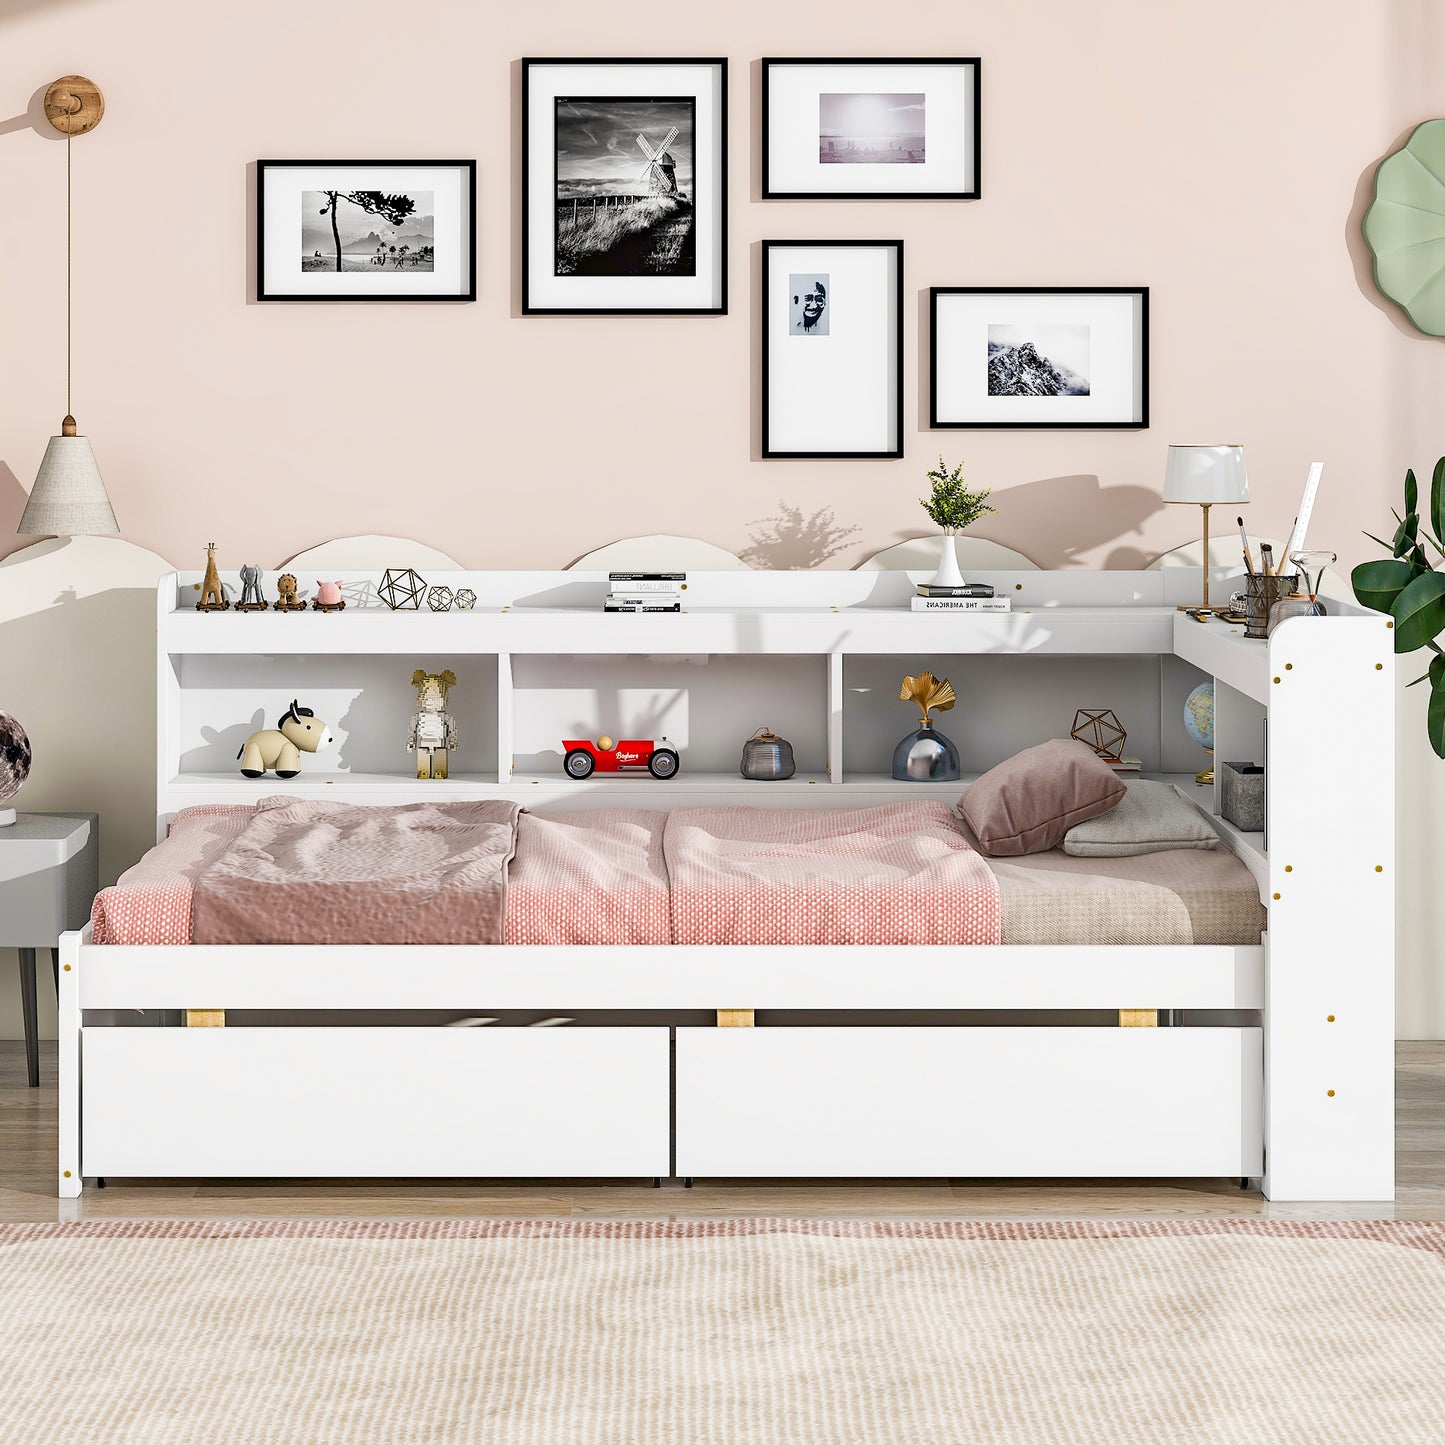 Twin Platform Bed with L-shaped Bookcases, Drawers, White